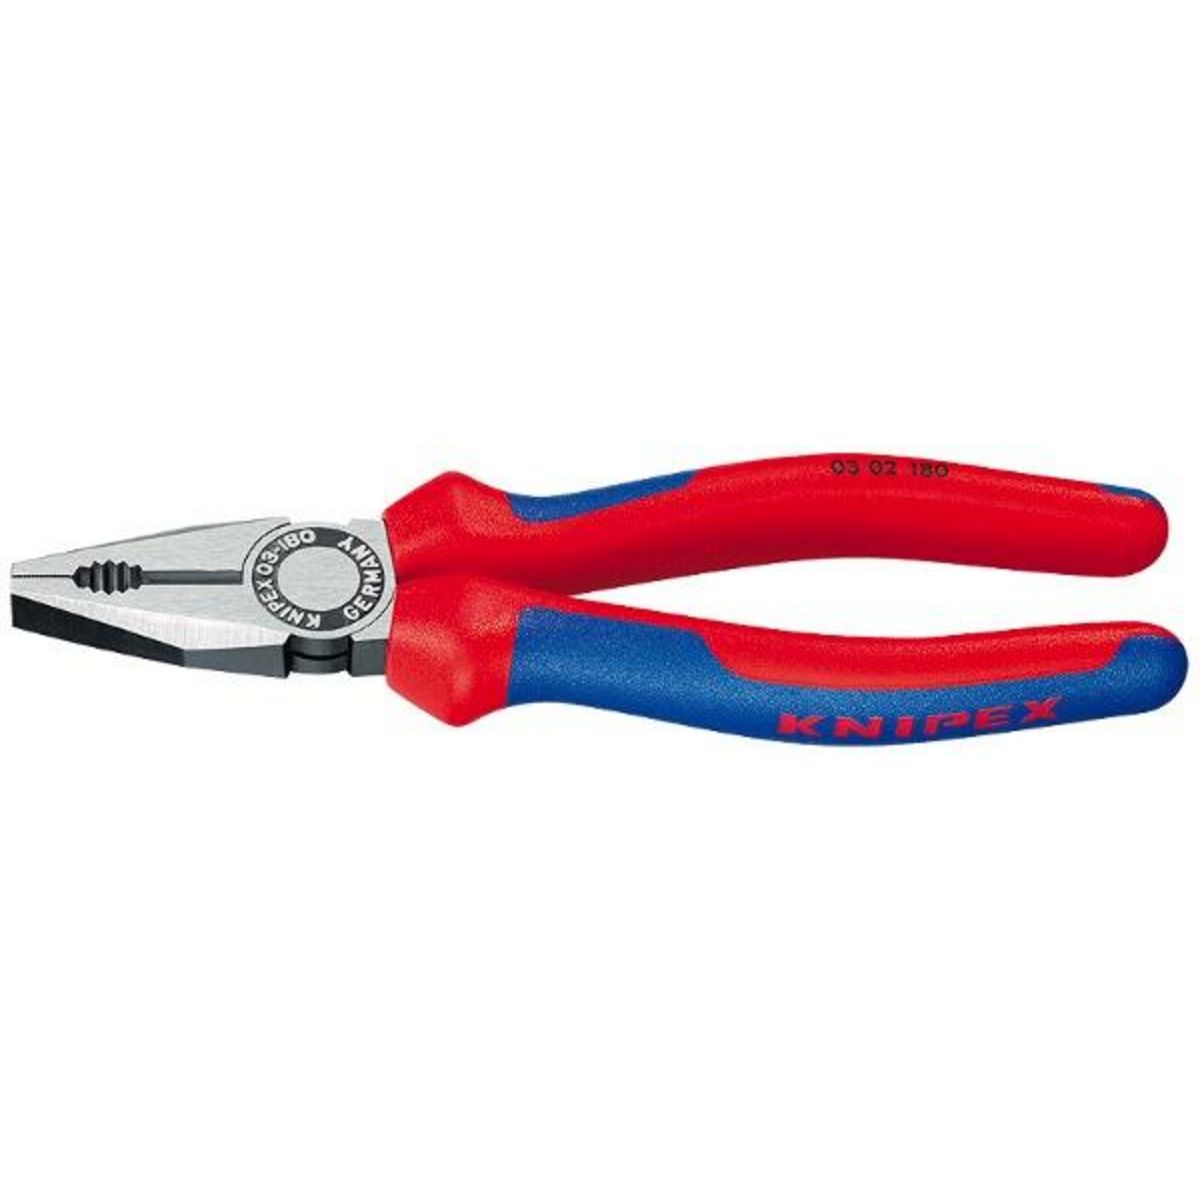 Knipex Pince universelle 200 mm